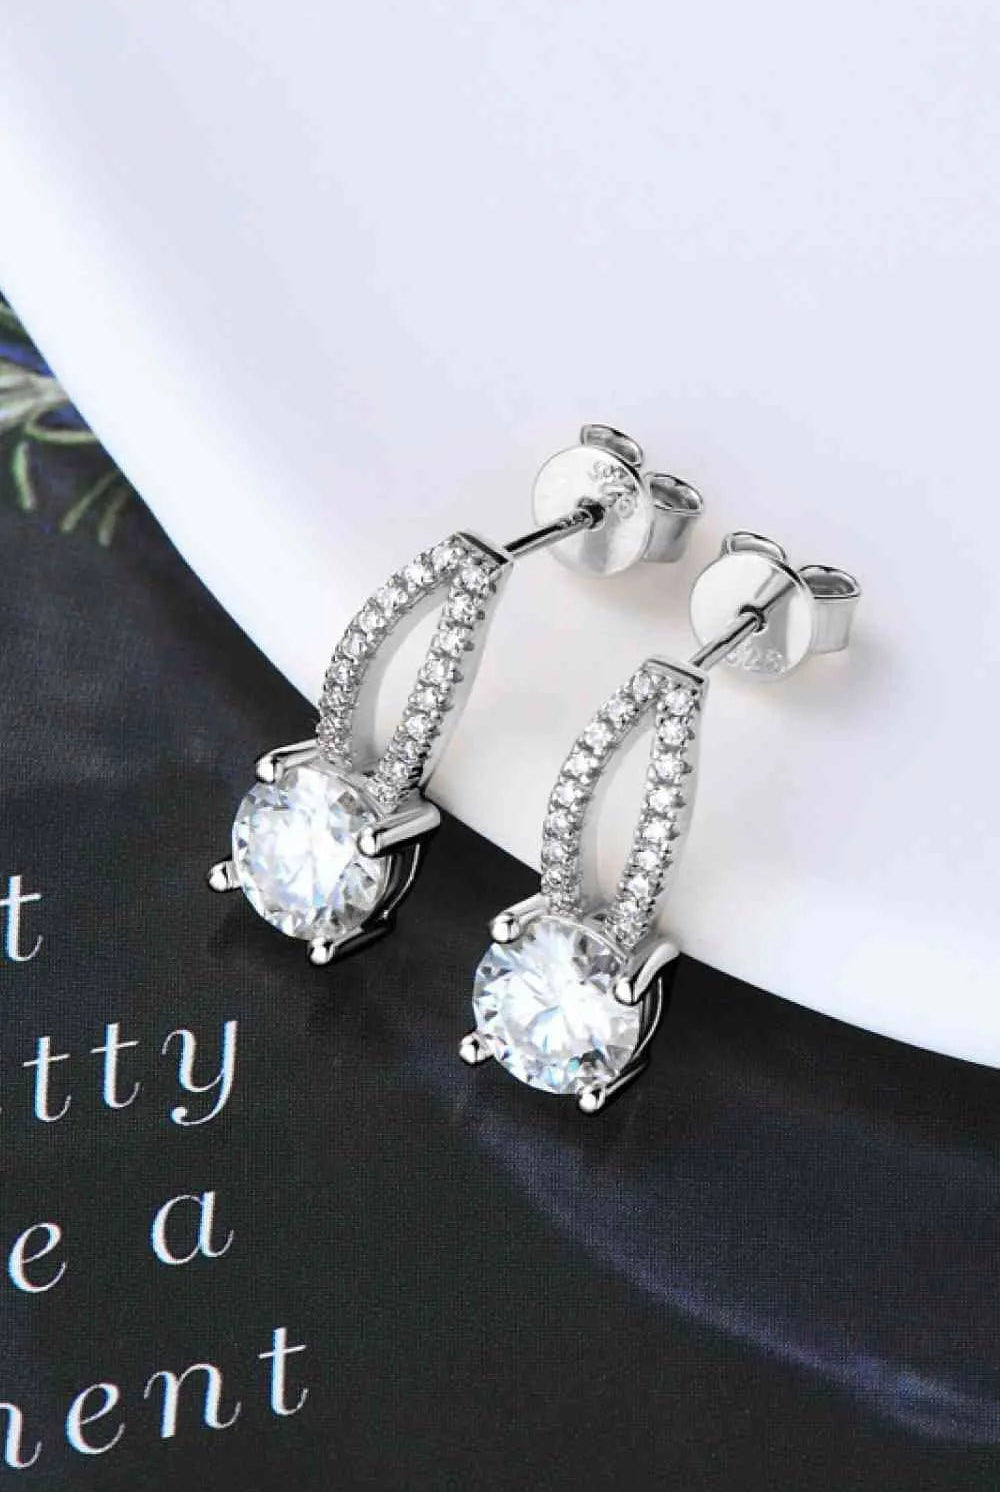 1 Carat Moissanite 925 Sterling Silver Earrings - GemThreads Boutique